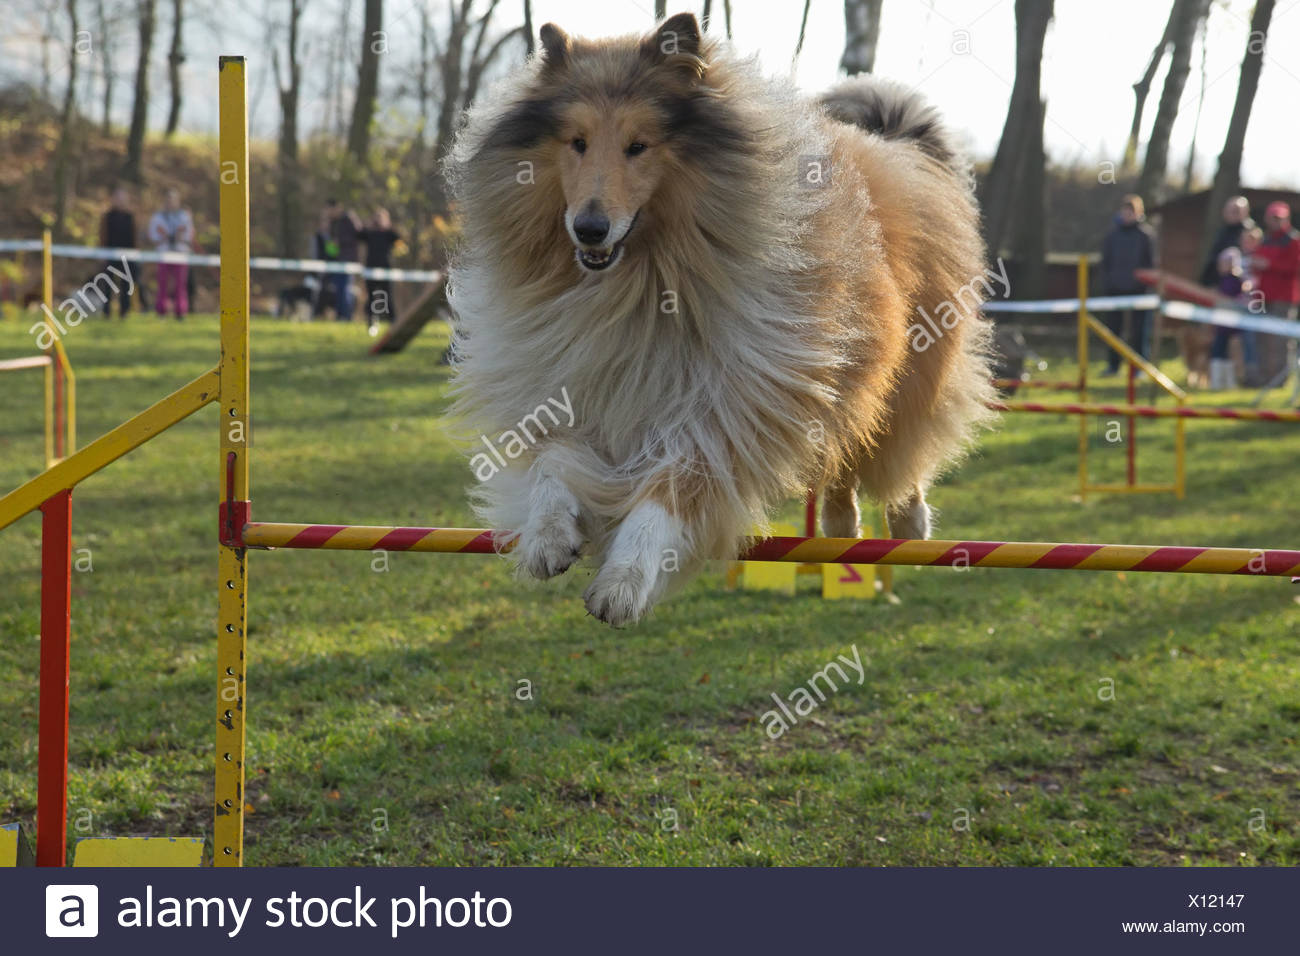 Collie Rough Dog Is Jumping An Obstacle Outdoors Stock Photo Alamy